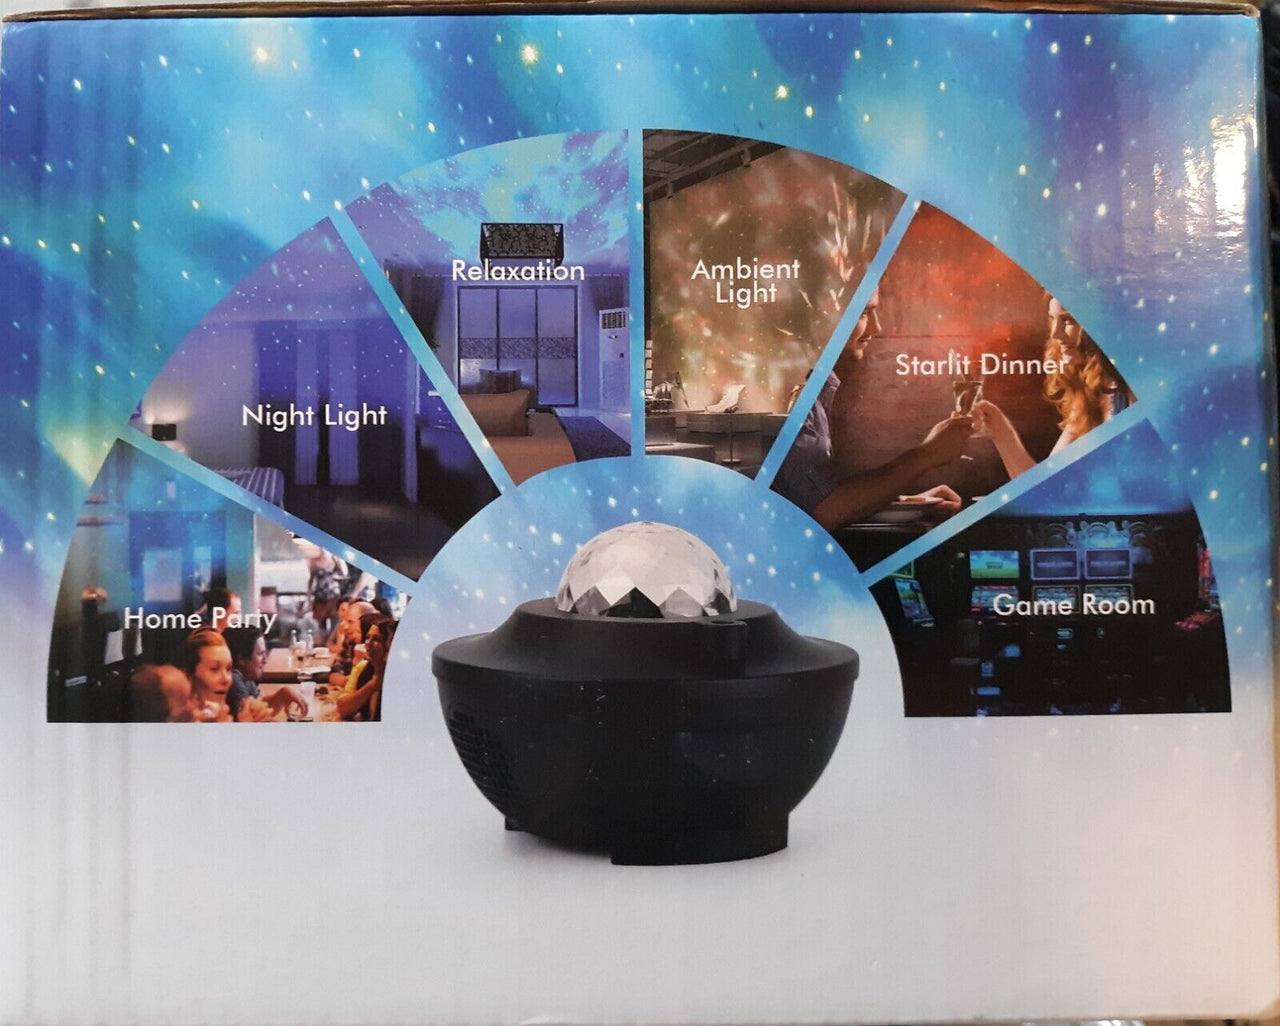 LED Starry Light Projector With Music